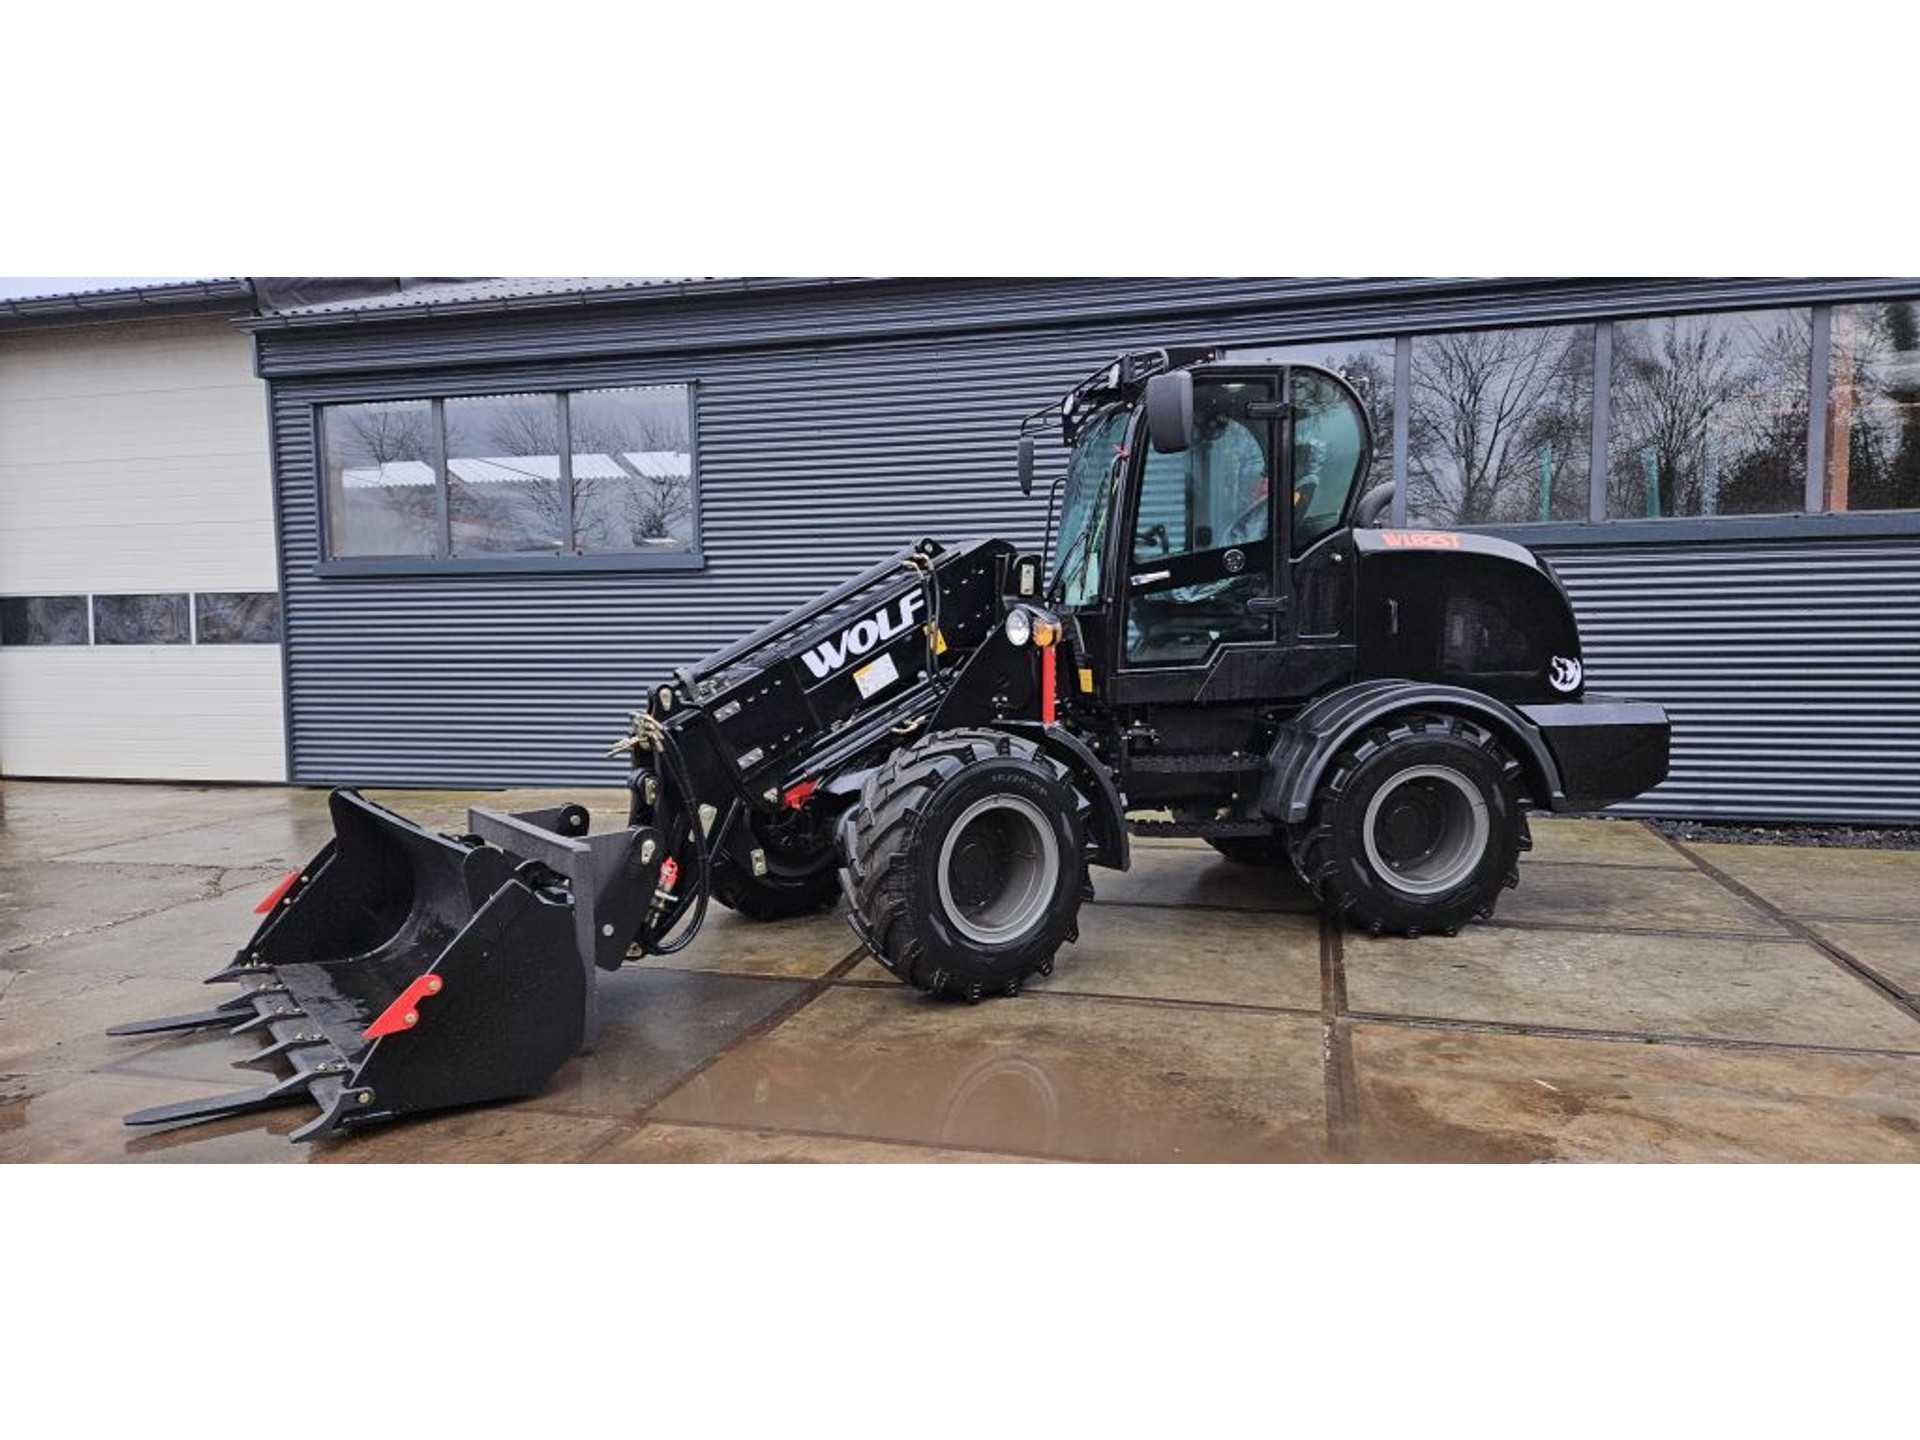 WOLF WL825 telescopic loader. ( NEW ) stage 5